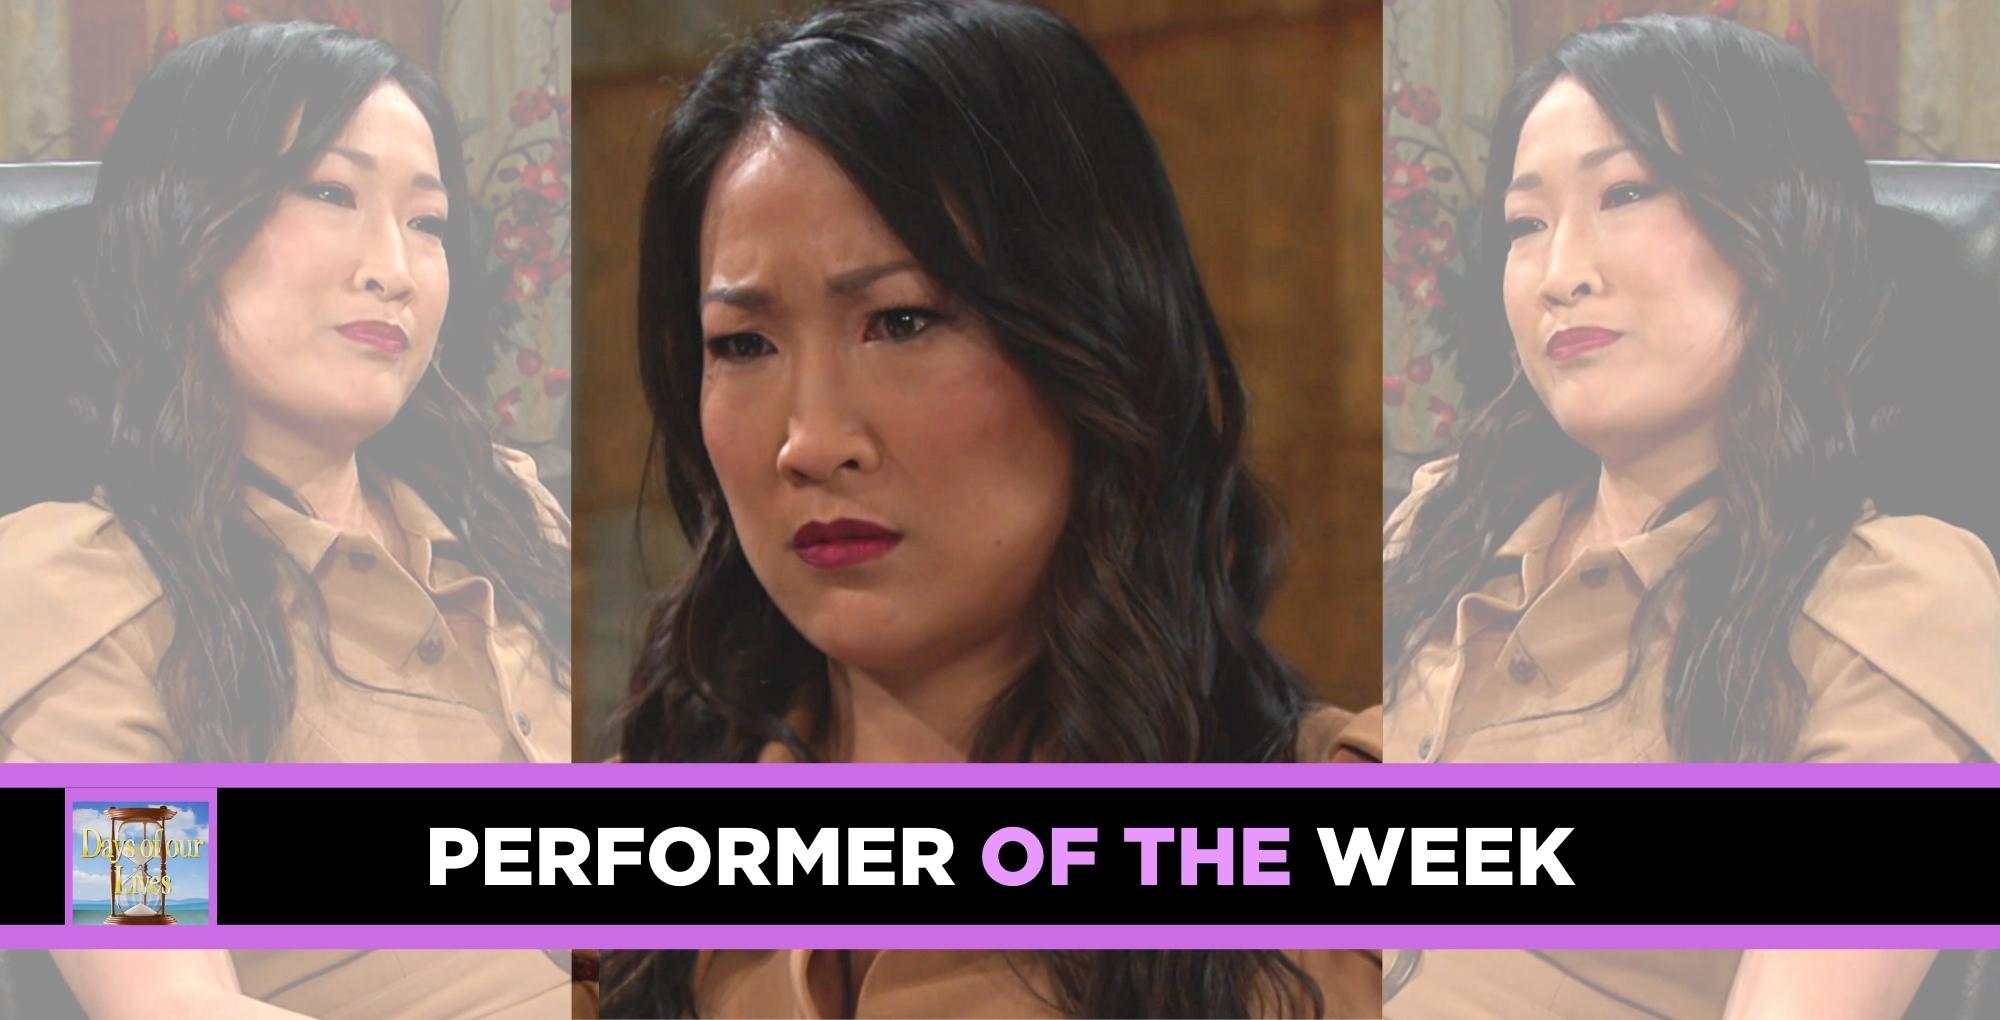 tina huang as melinda trask is days of our lives performer the week.